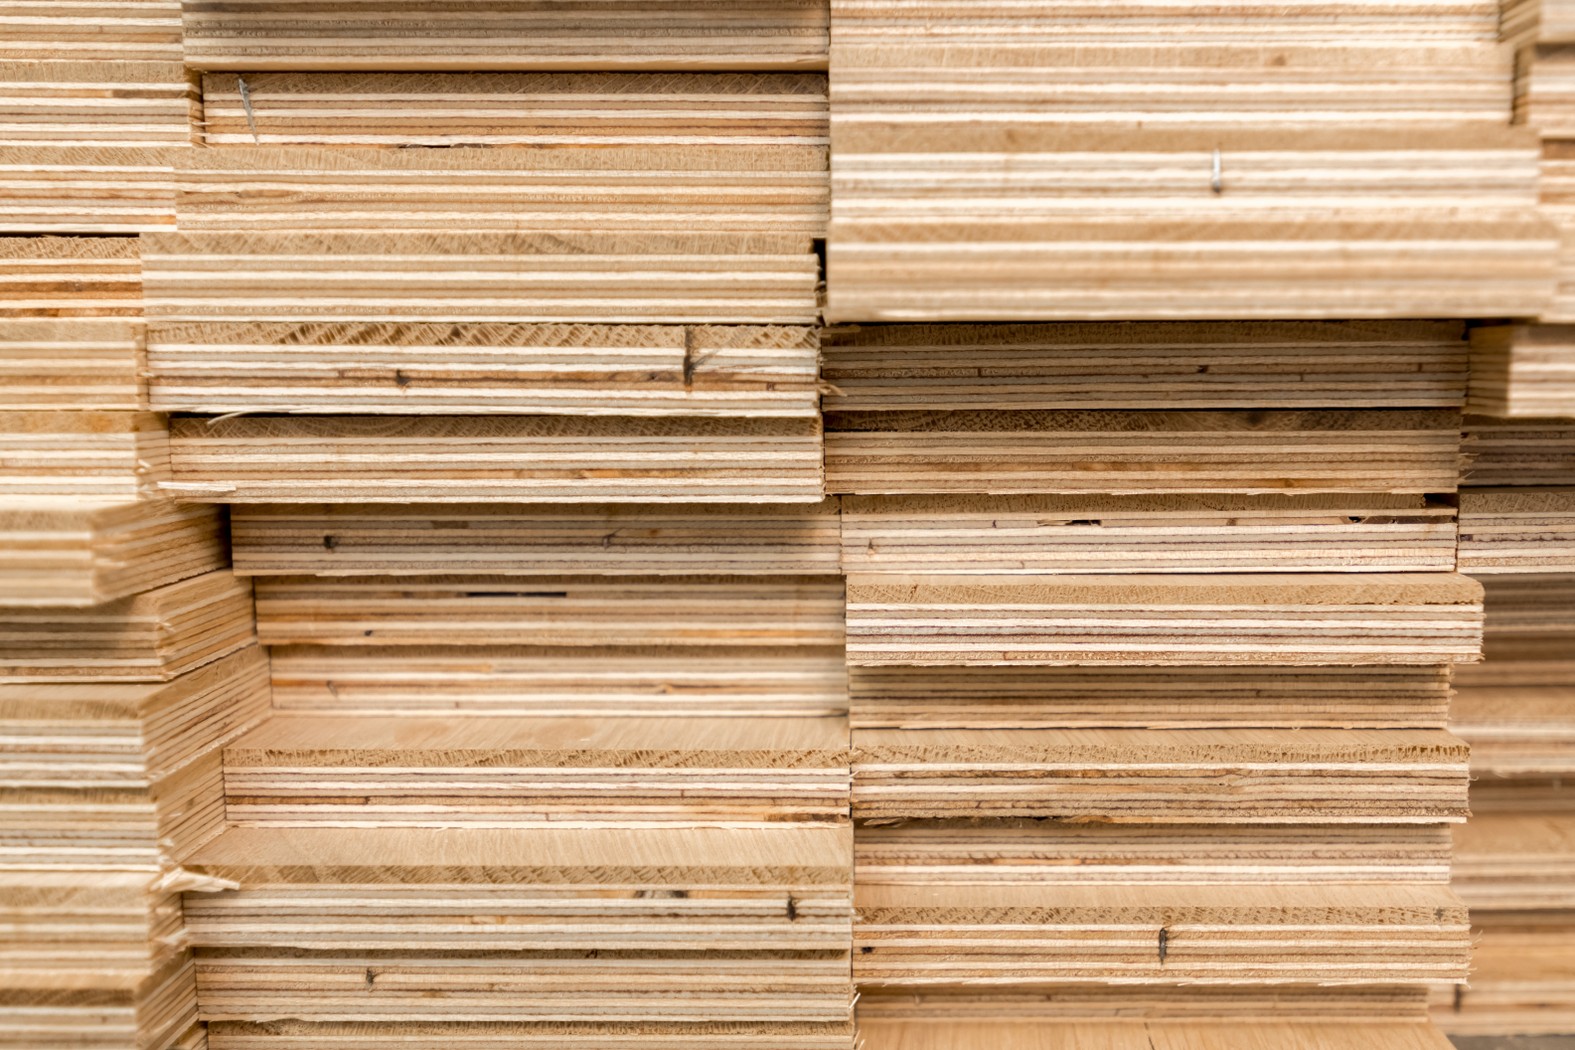 plywood-textured-material-structure-close-up-2022-08-01-04-59-10-utc_1575x1050